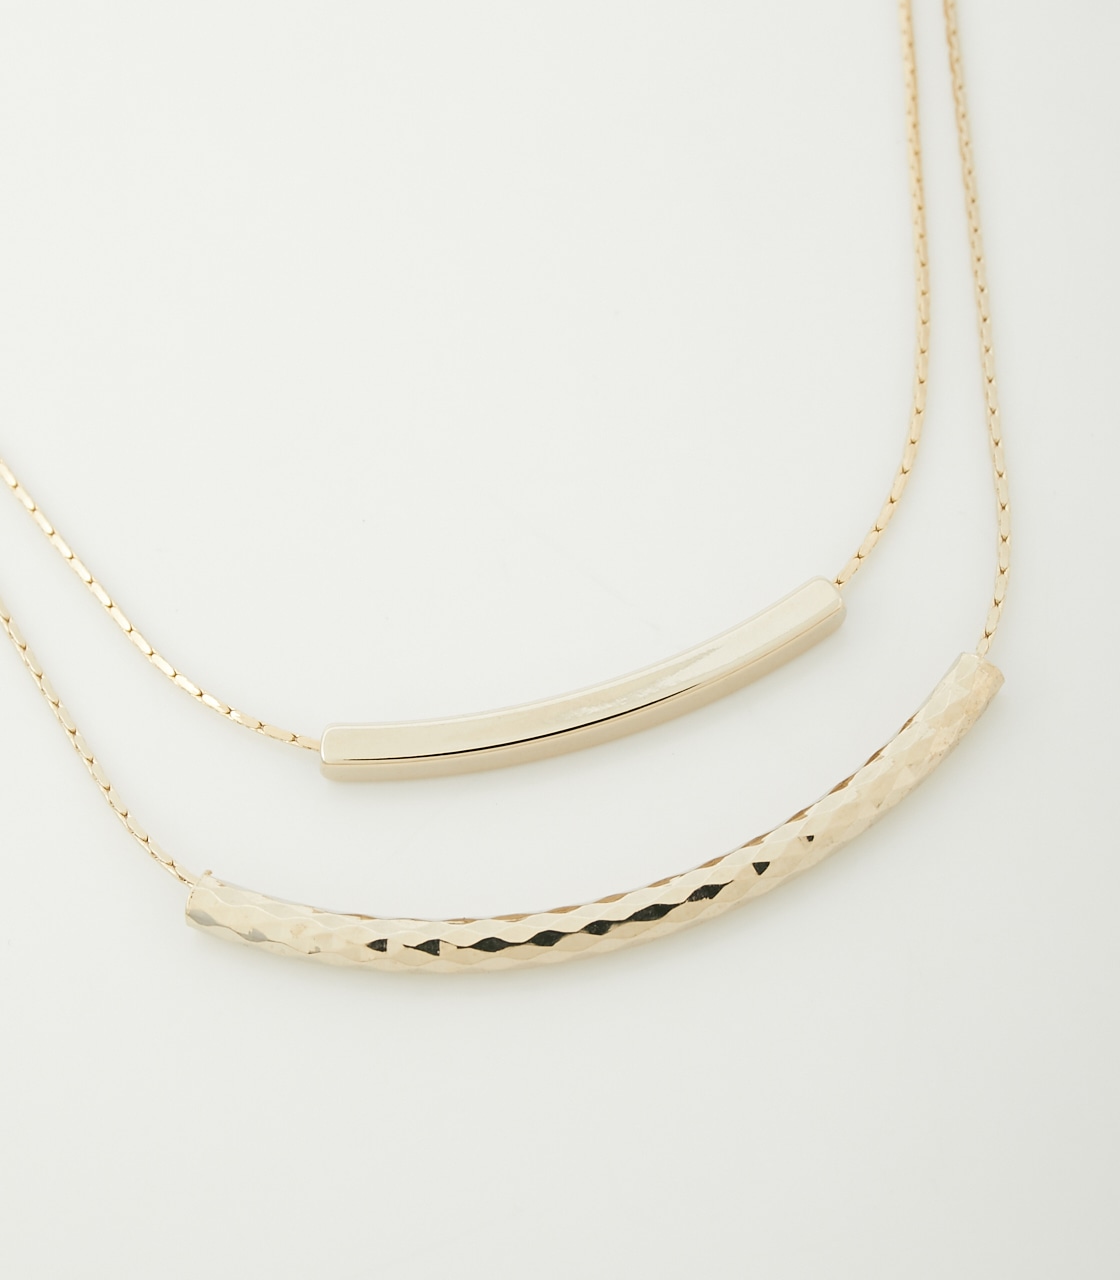 DOUBLE CHAIN PIPE NECKLACE/ダブルチェーンパイプネックレス 詳細画像 L/GLD 3